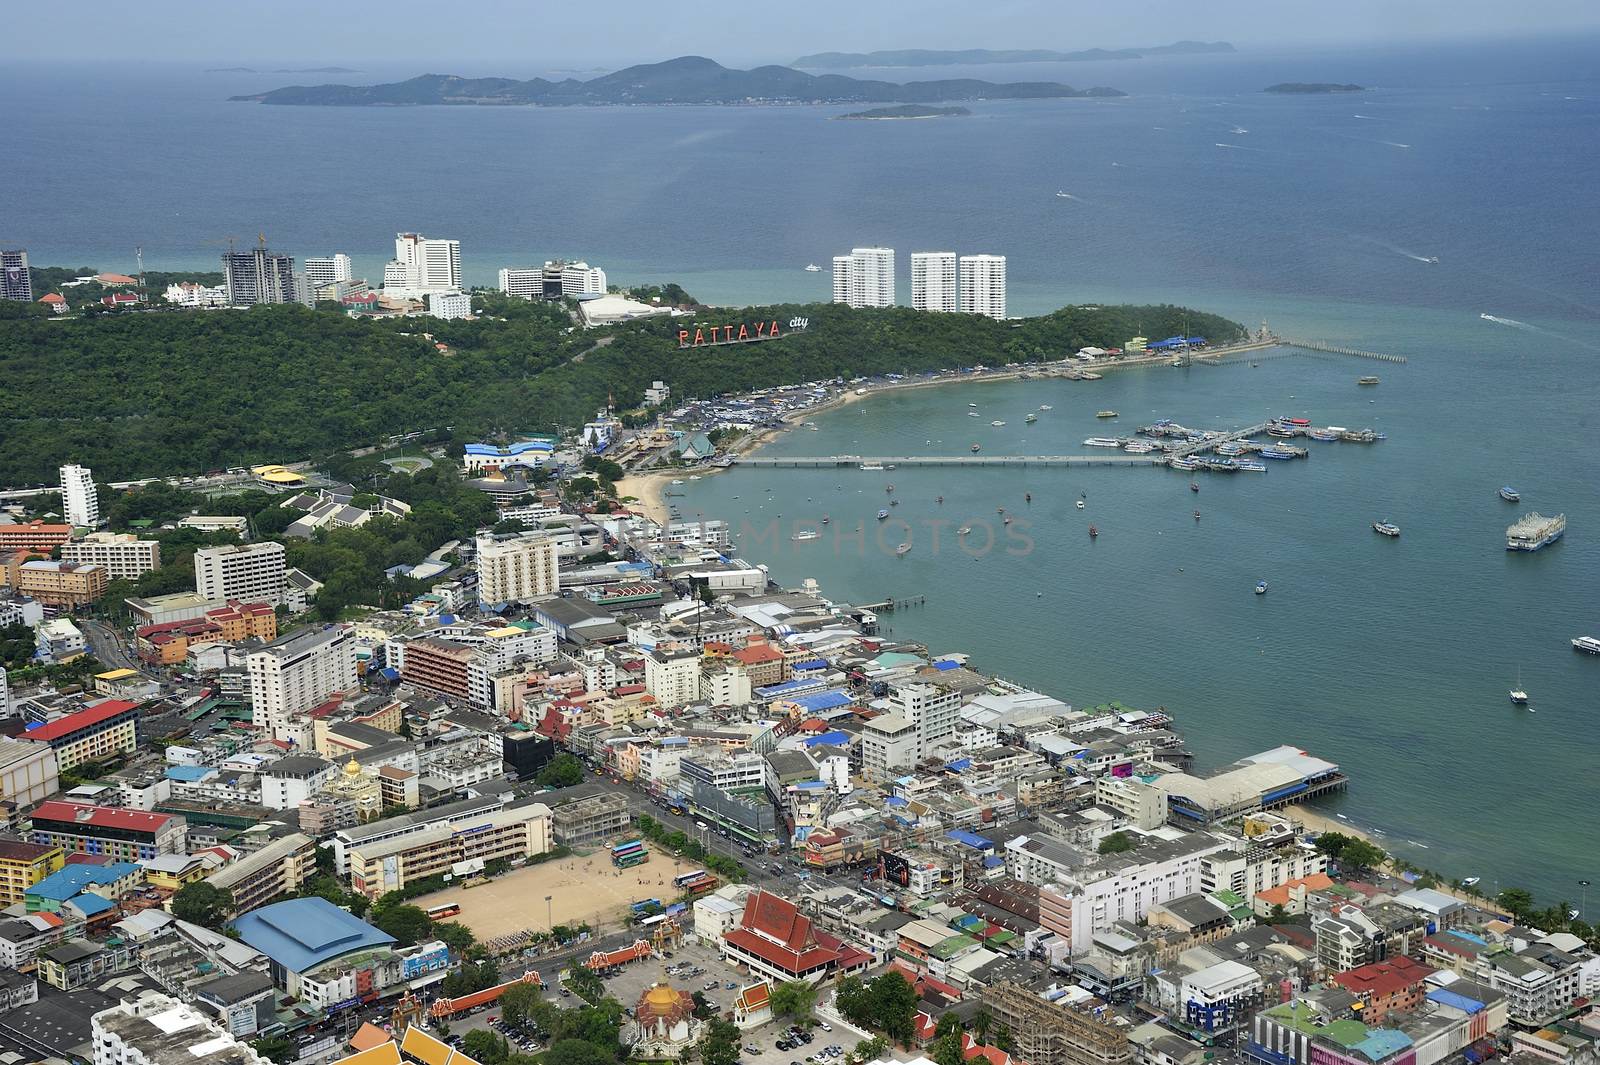 Aerial view of Pattaya City, Chonburi, Thailand. by think4photop